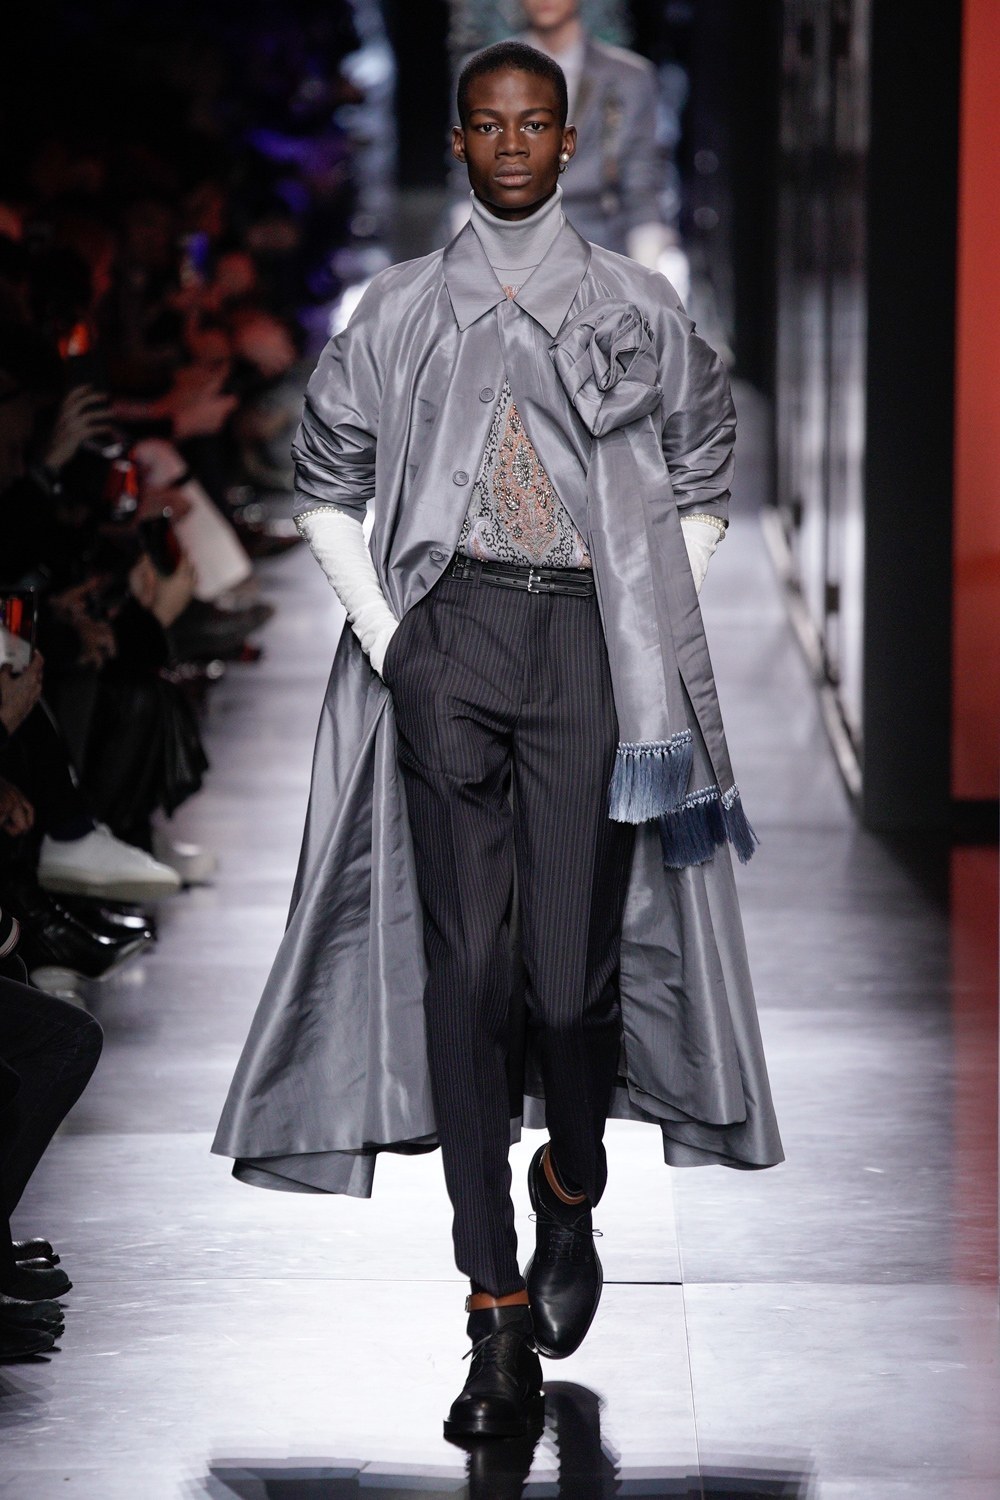 Peter Philips On The Maleup Of Diors Fall AW21 Menswear Show